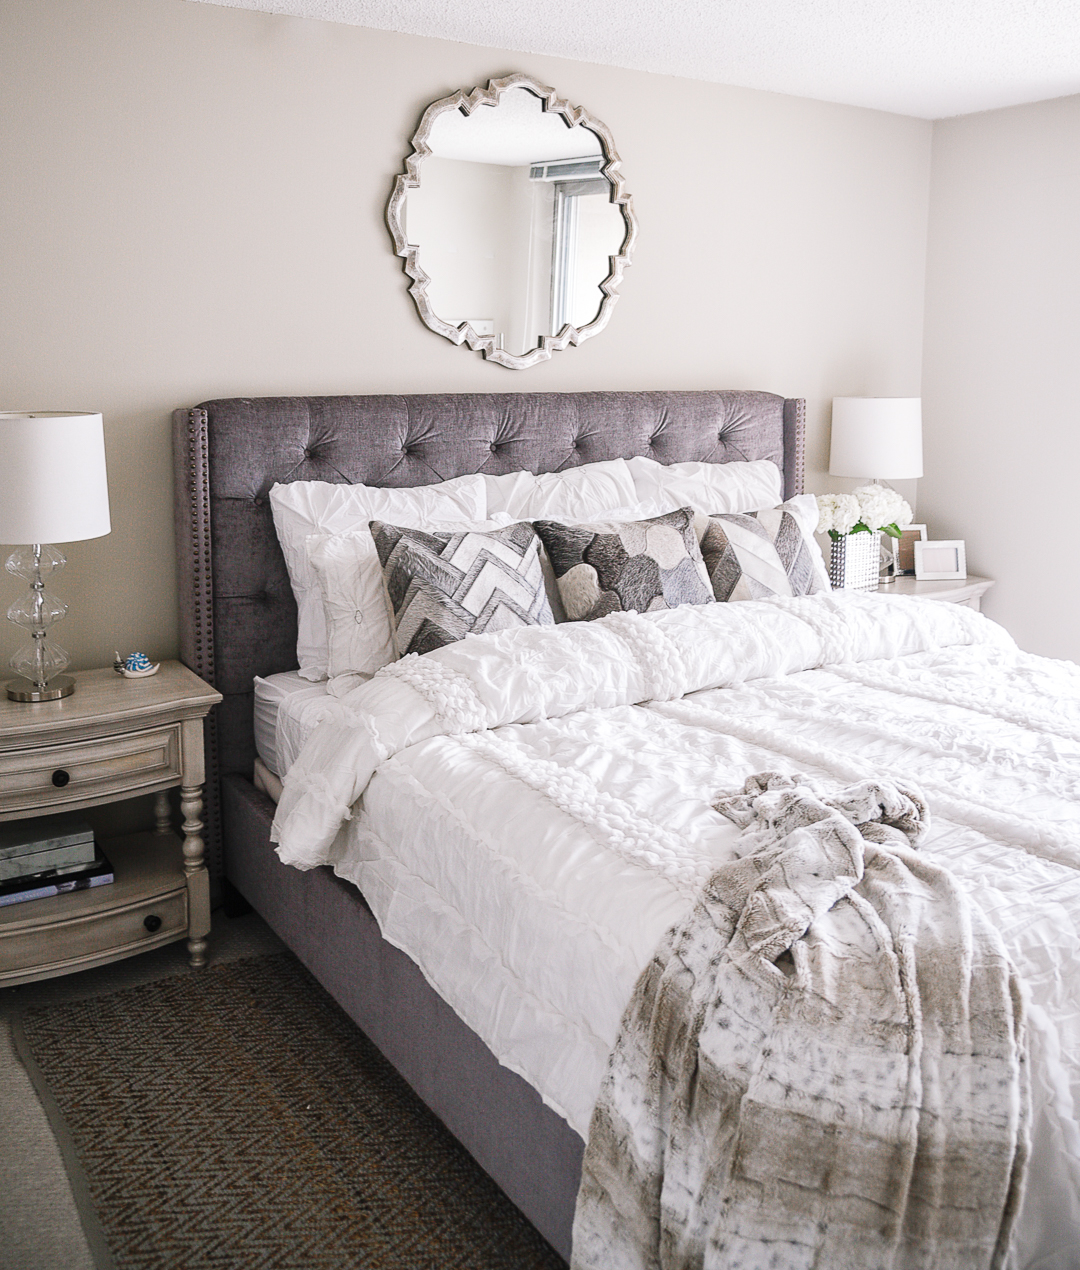 A grey and white master bedroom design. - Our Master Bedroom Linen Refresh with Home Decorators by Chicago style blogger Visions of Vogue